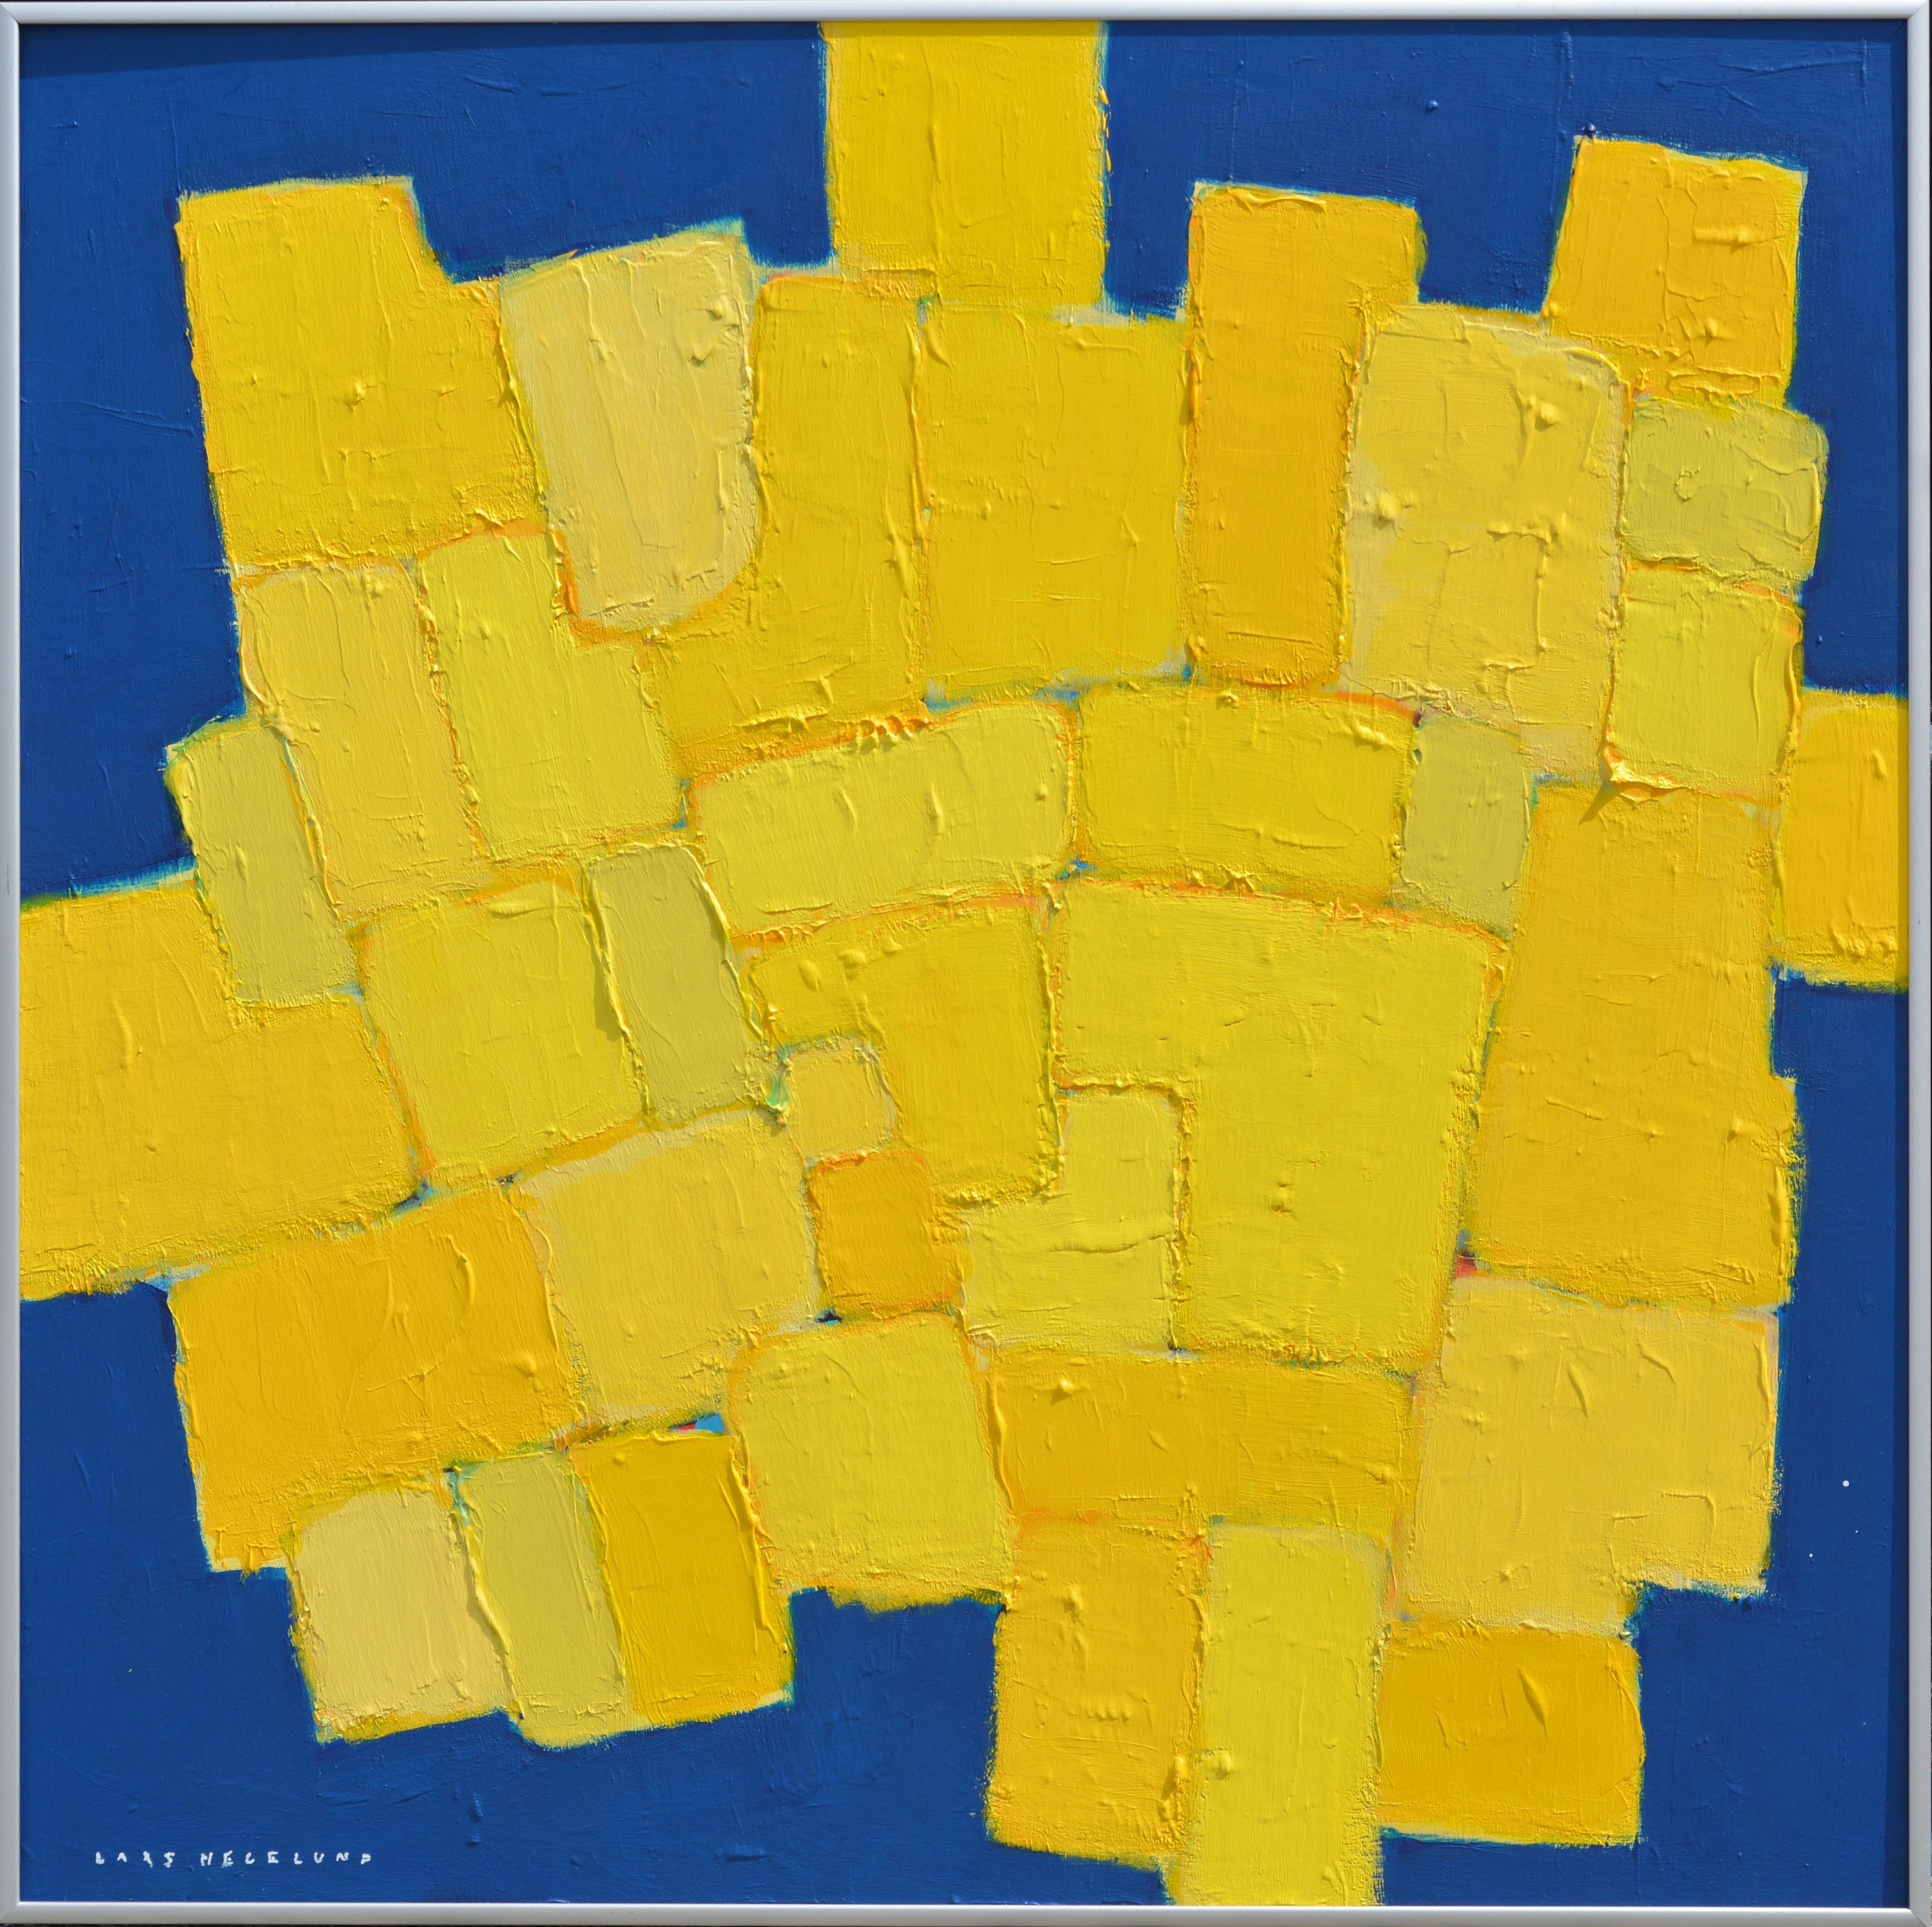 Sometimes less is more and this work is all about color, texture and an organic composition that stays alive.

'Composition Jaune sur Fond Bleu'
by Lars Hegelund, American b. 1947.
Acrylic on Canvas, signed.
Measures: 24 x 24 in. w/o frame, 25x